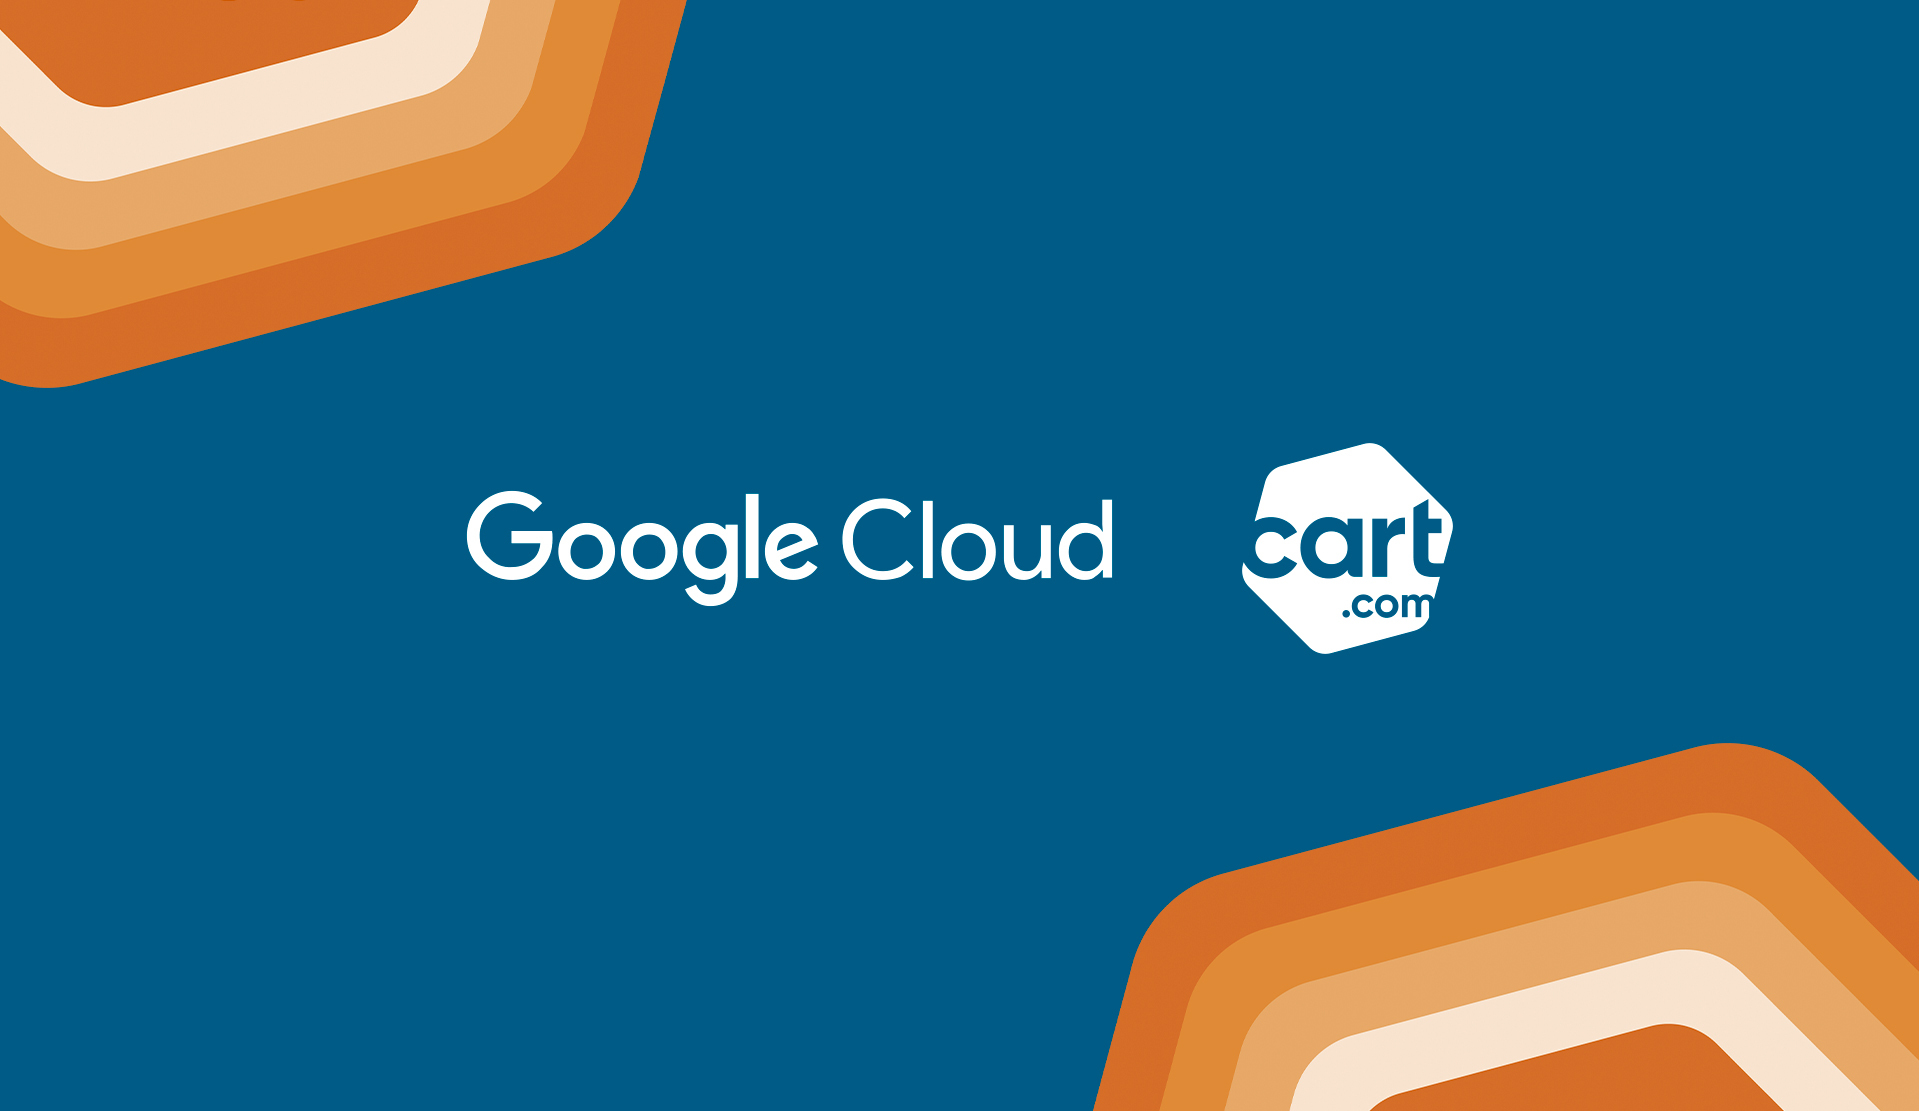 Cart.com’s Unified Analytics are now available on Google Cloud Marketplace